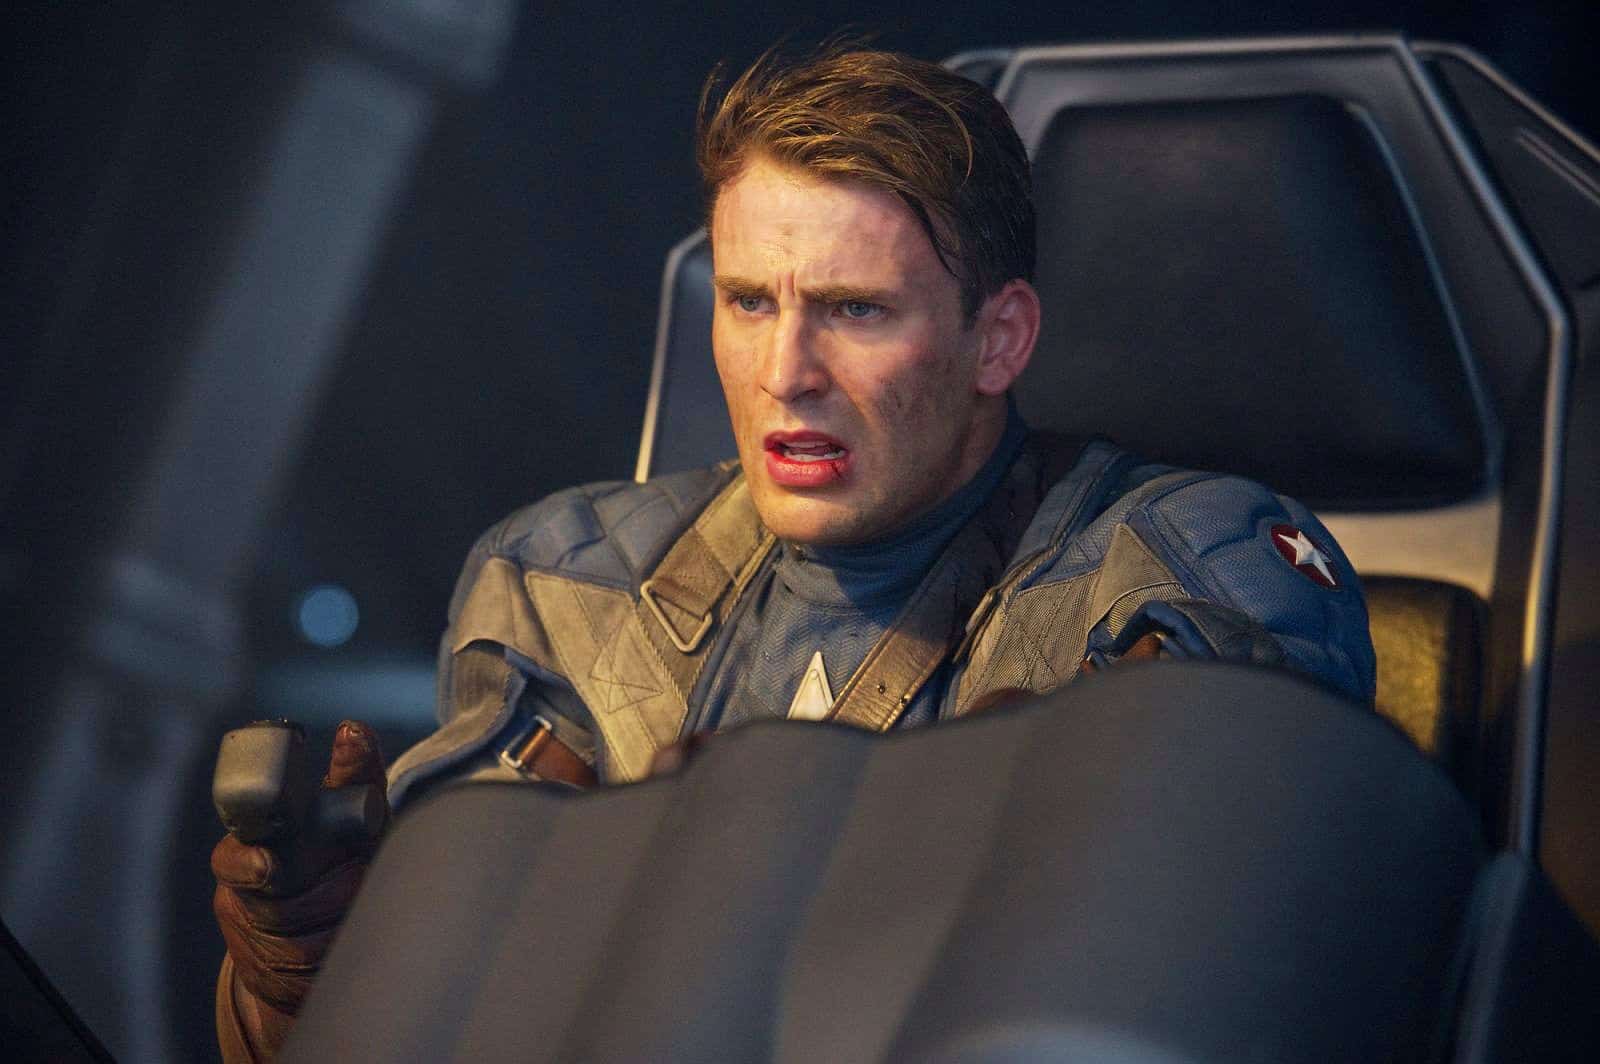 Looks like jumping out of the plane wasn't an option for Captain America. Pic courtesy: marvelcinematicuniverse.fandom.com